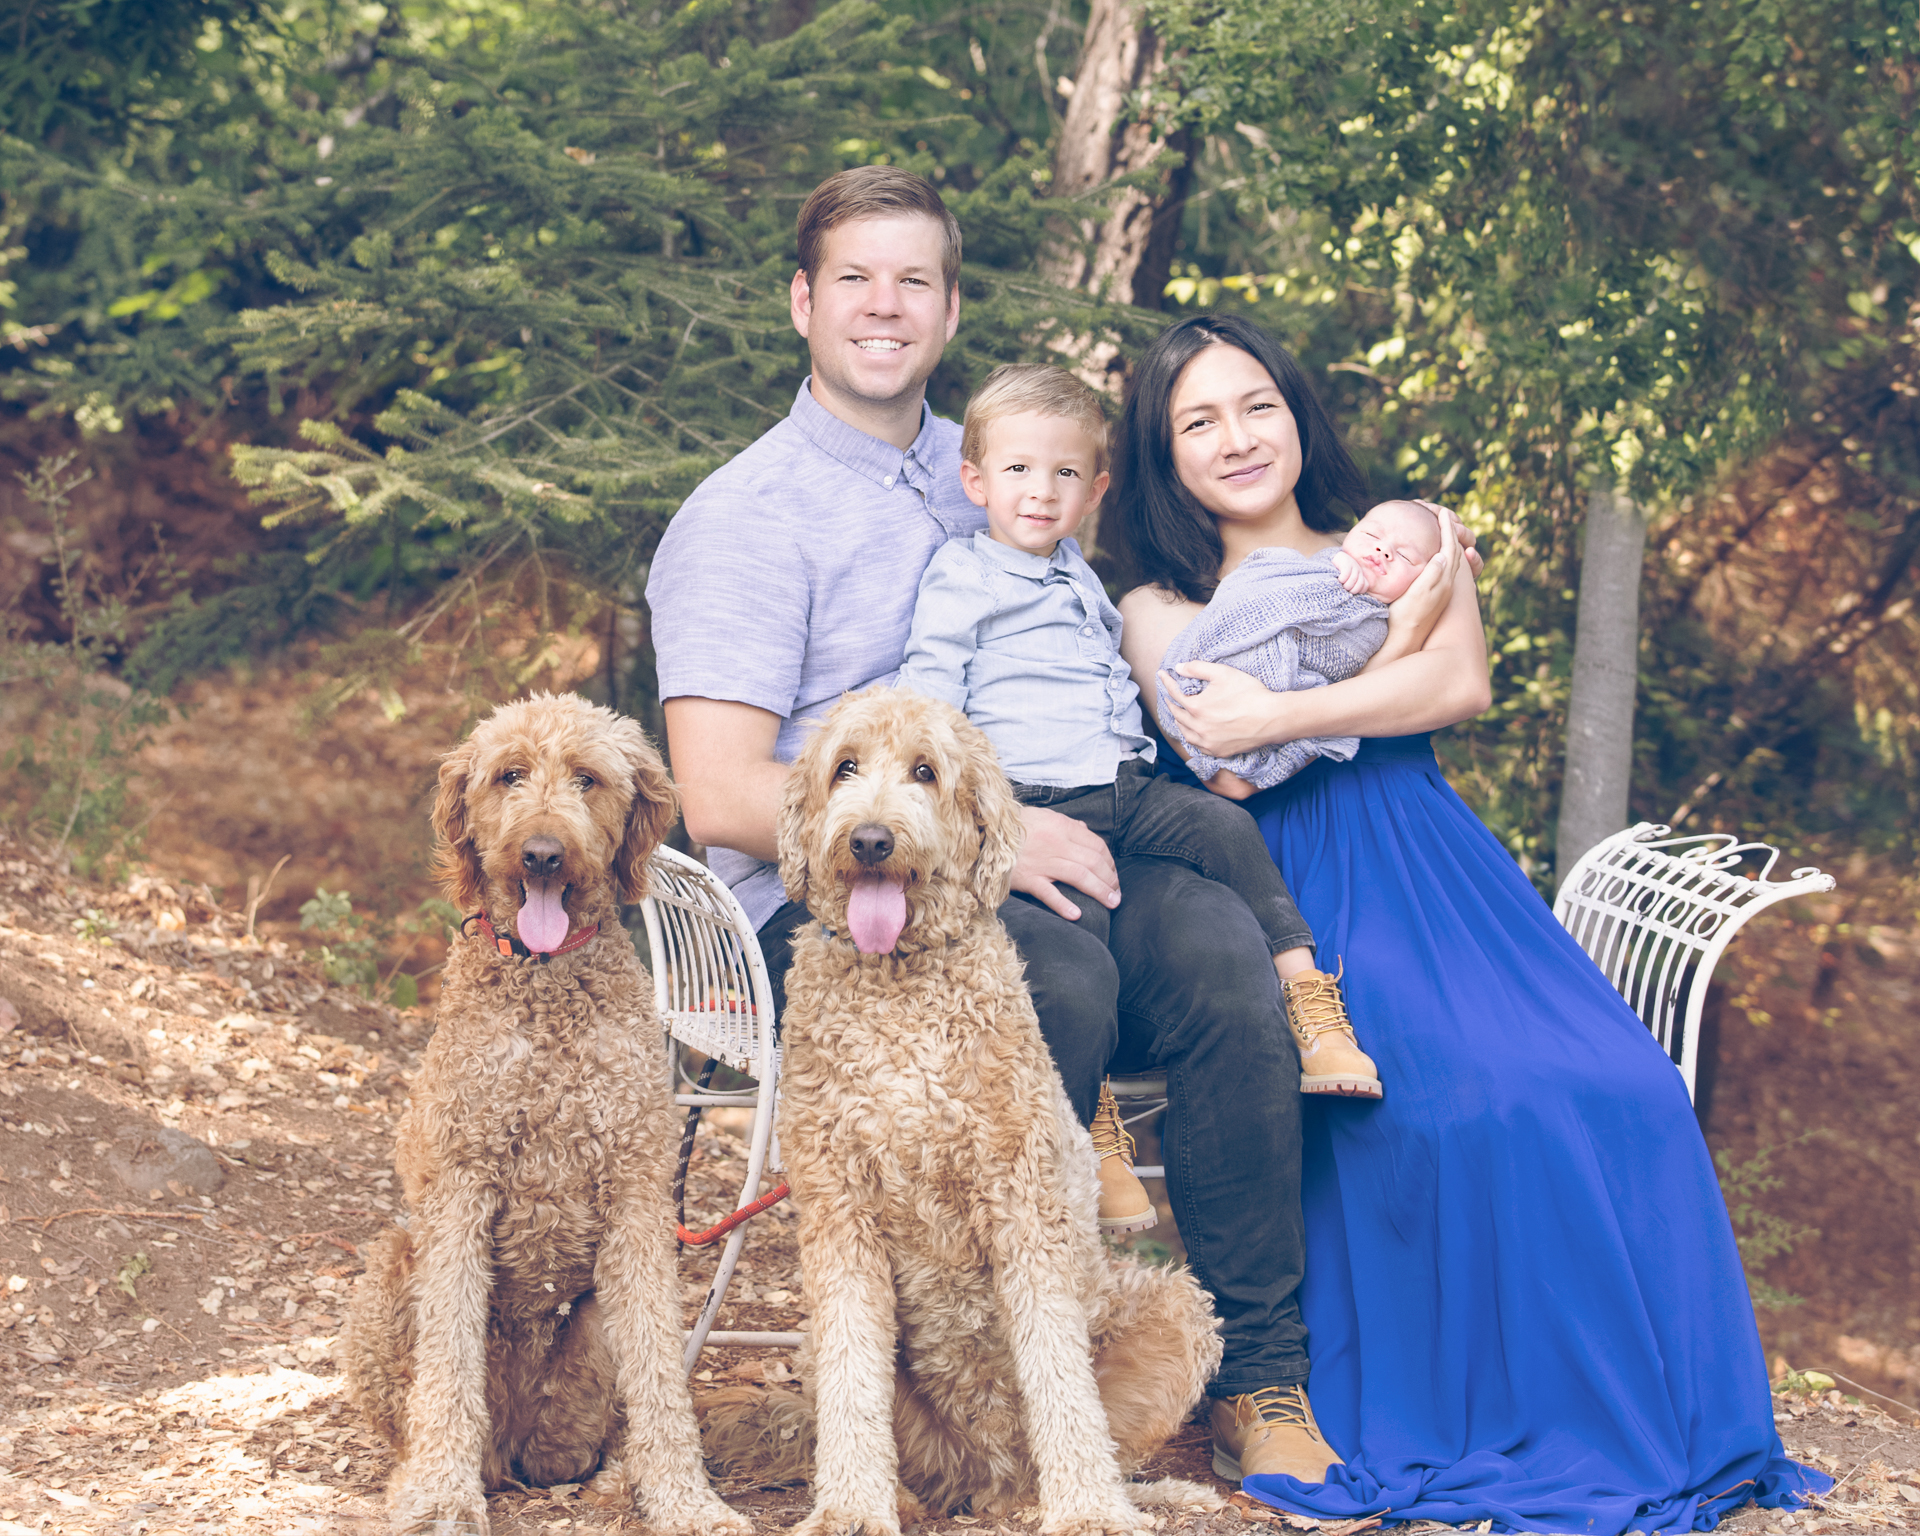 Family of 4 posing outdoors. Mom wears blue dress while holding newborn girl. Dad wears purple T-shirt while holding toddler boy on purple T-shirt. 2 brown dogs are sitting next them.